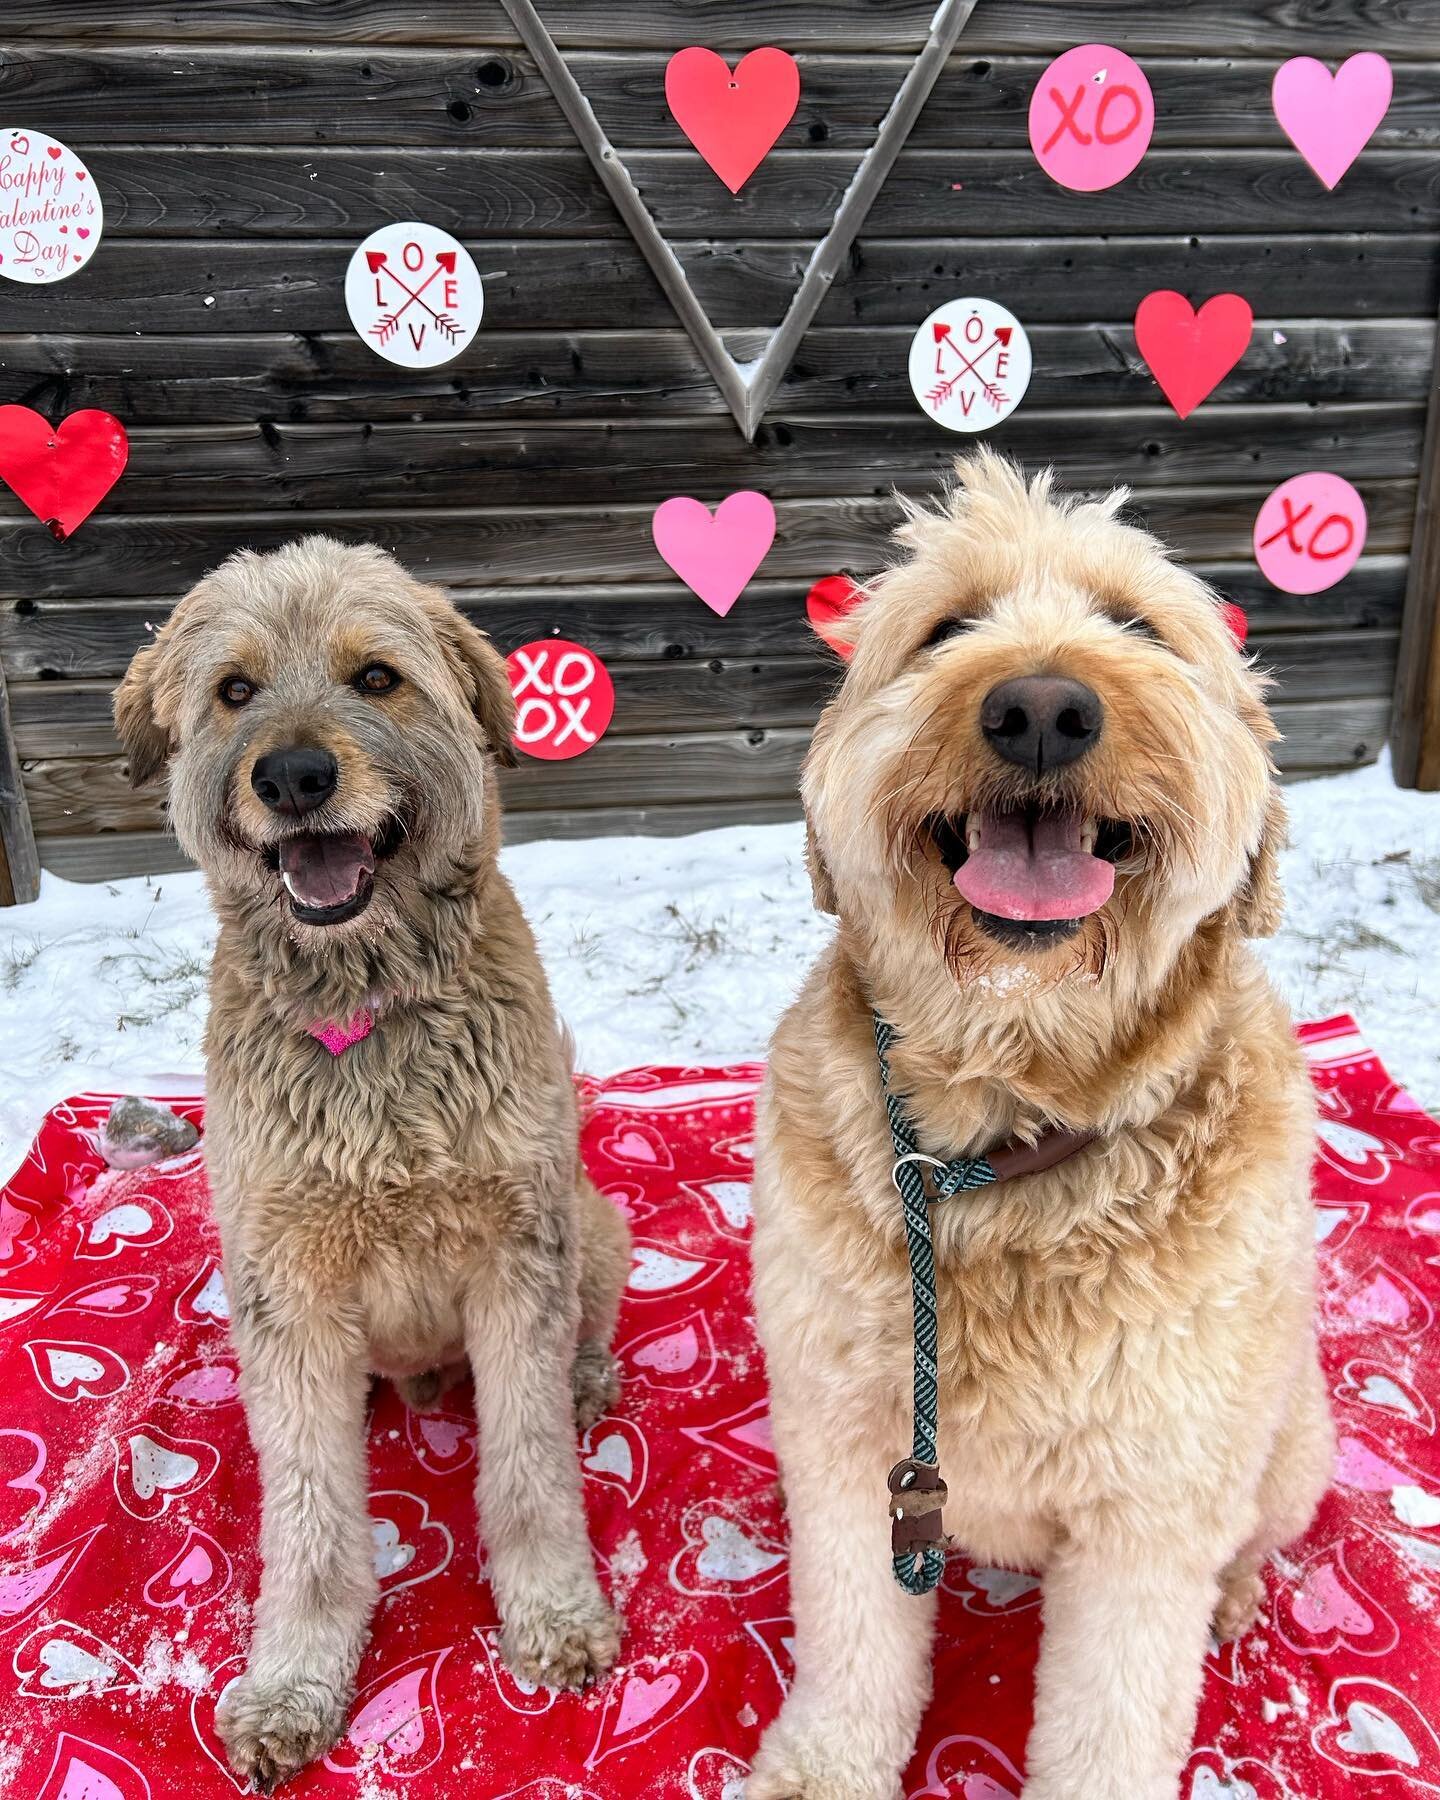 💘hopefully you aren&rsquo;t tired of our valentines couples yet!💘. Such a successful event, thank you to all of our parents and pups who participated. 

Looking forward to spreading the love next year❣️